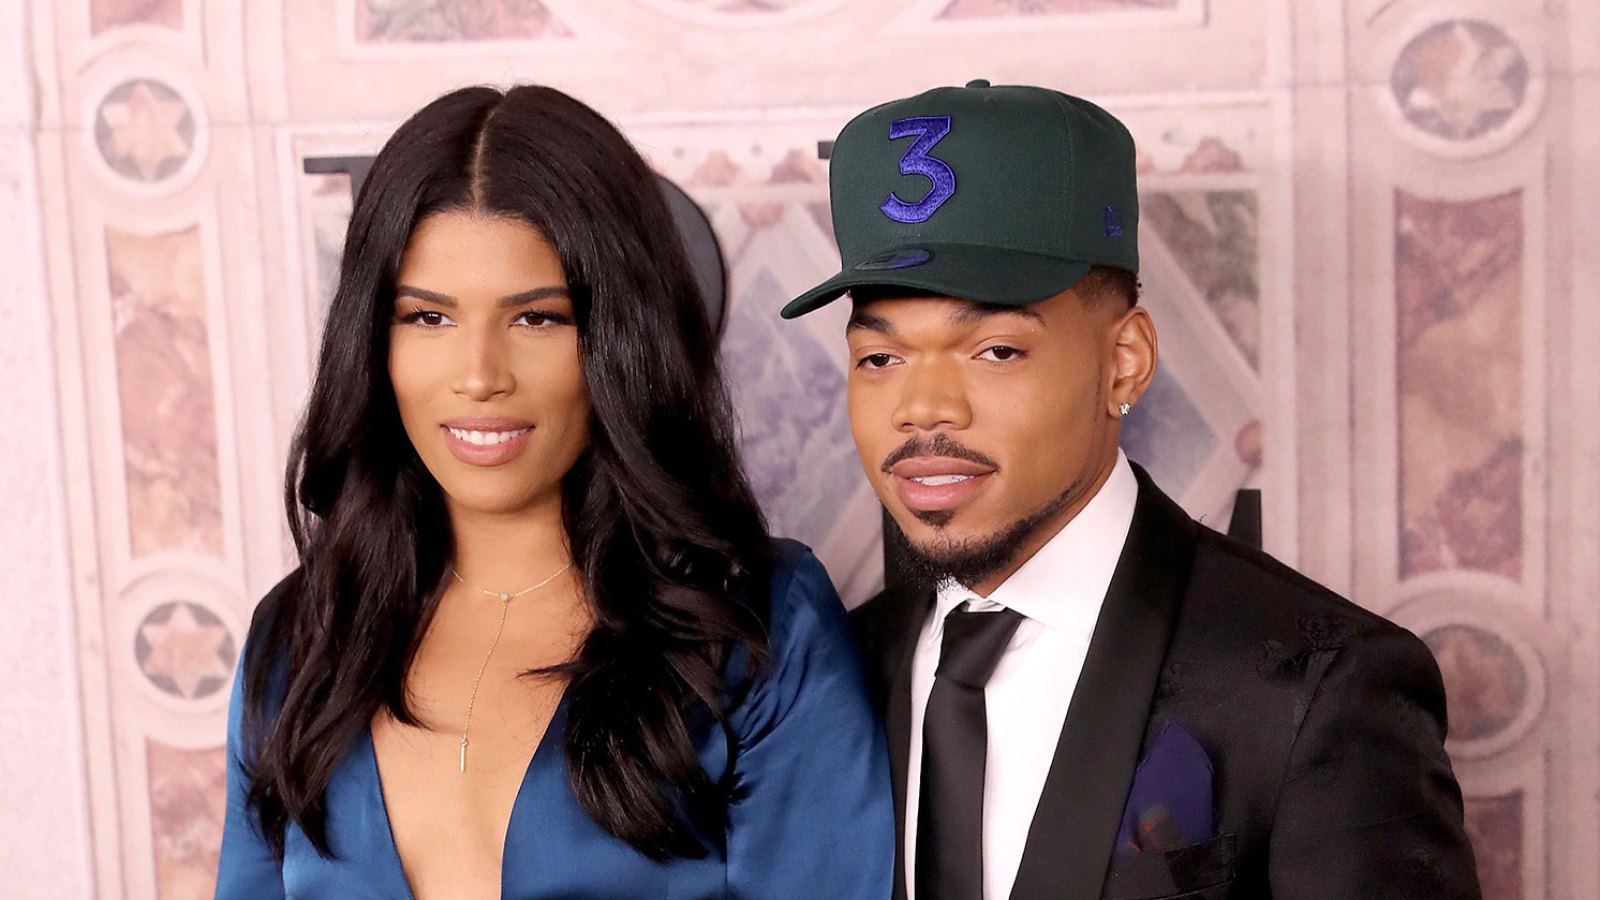 Chance the Rapper and Wife Kirsten Corley Expecting Second Child Together